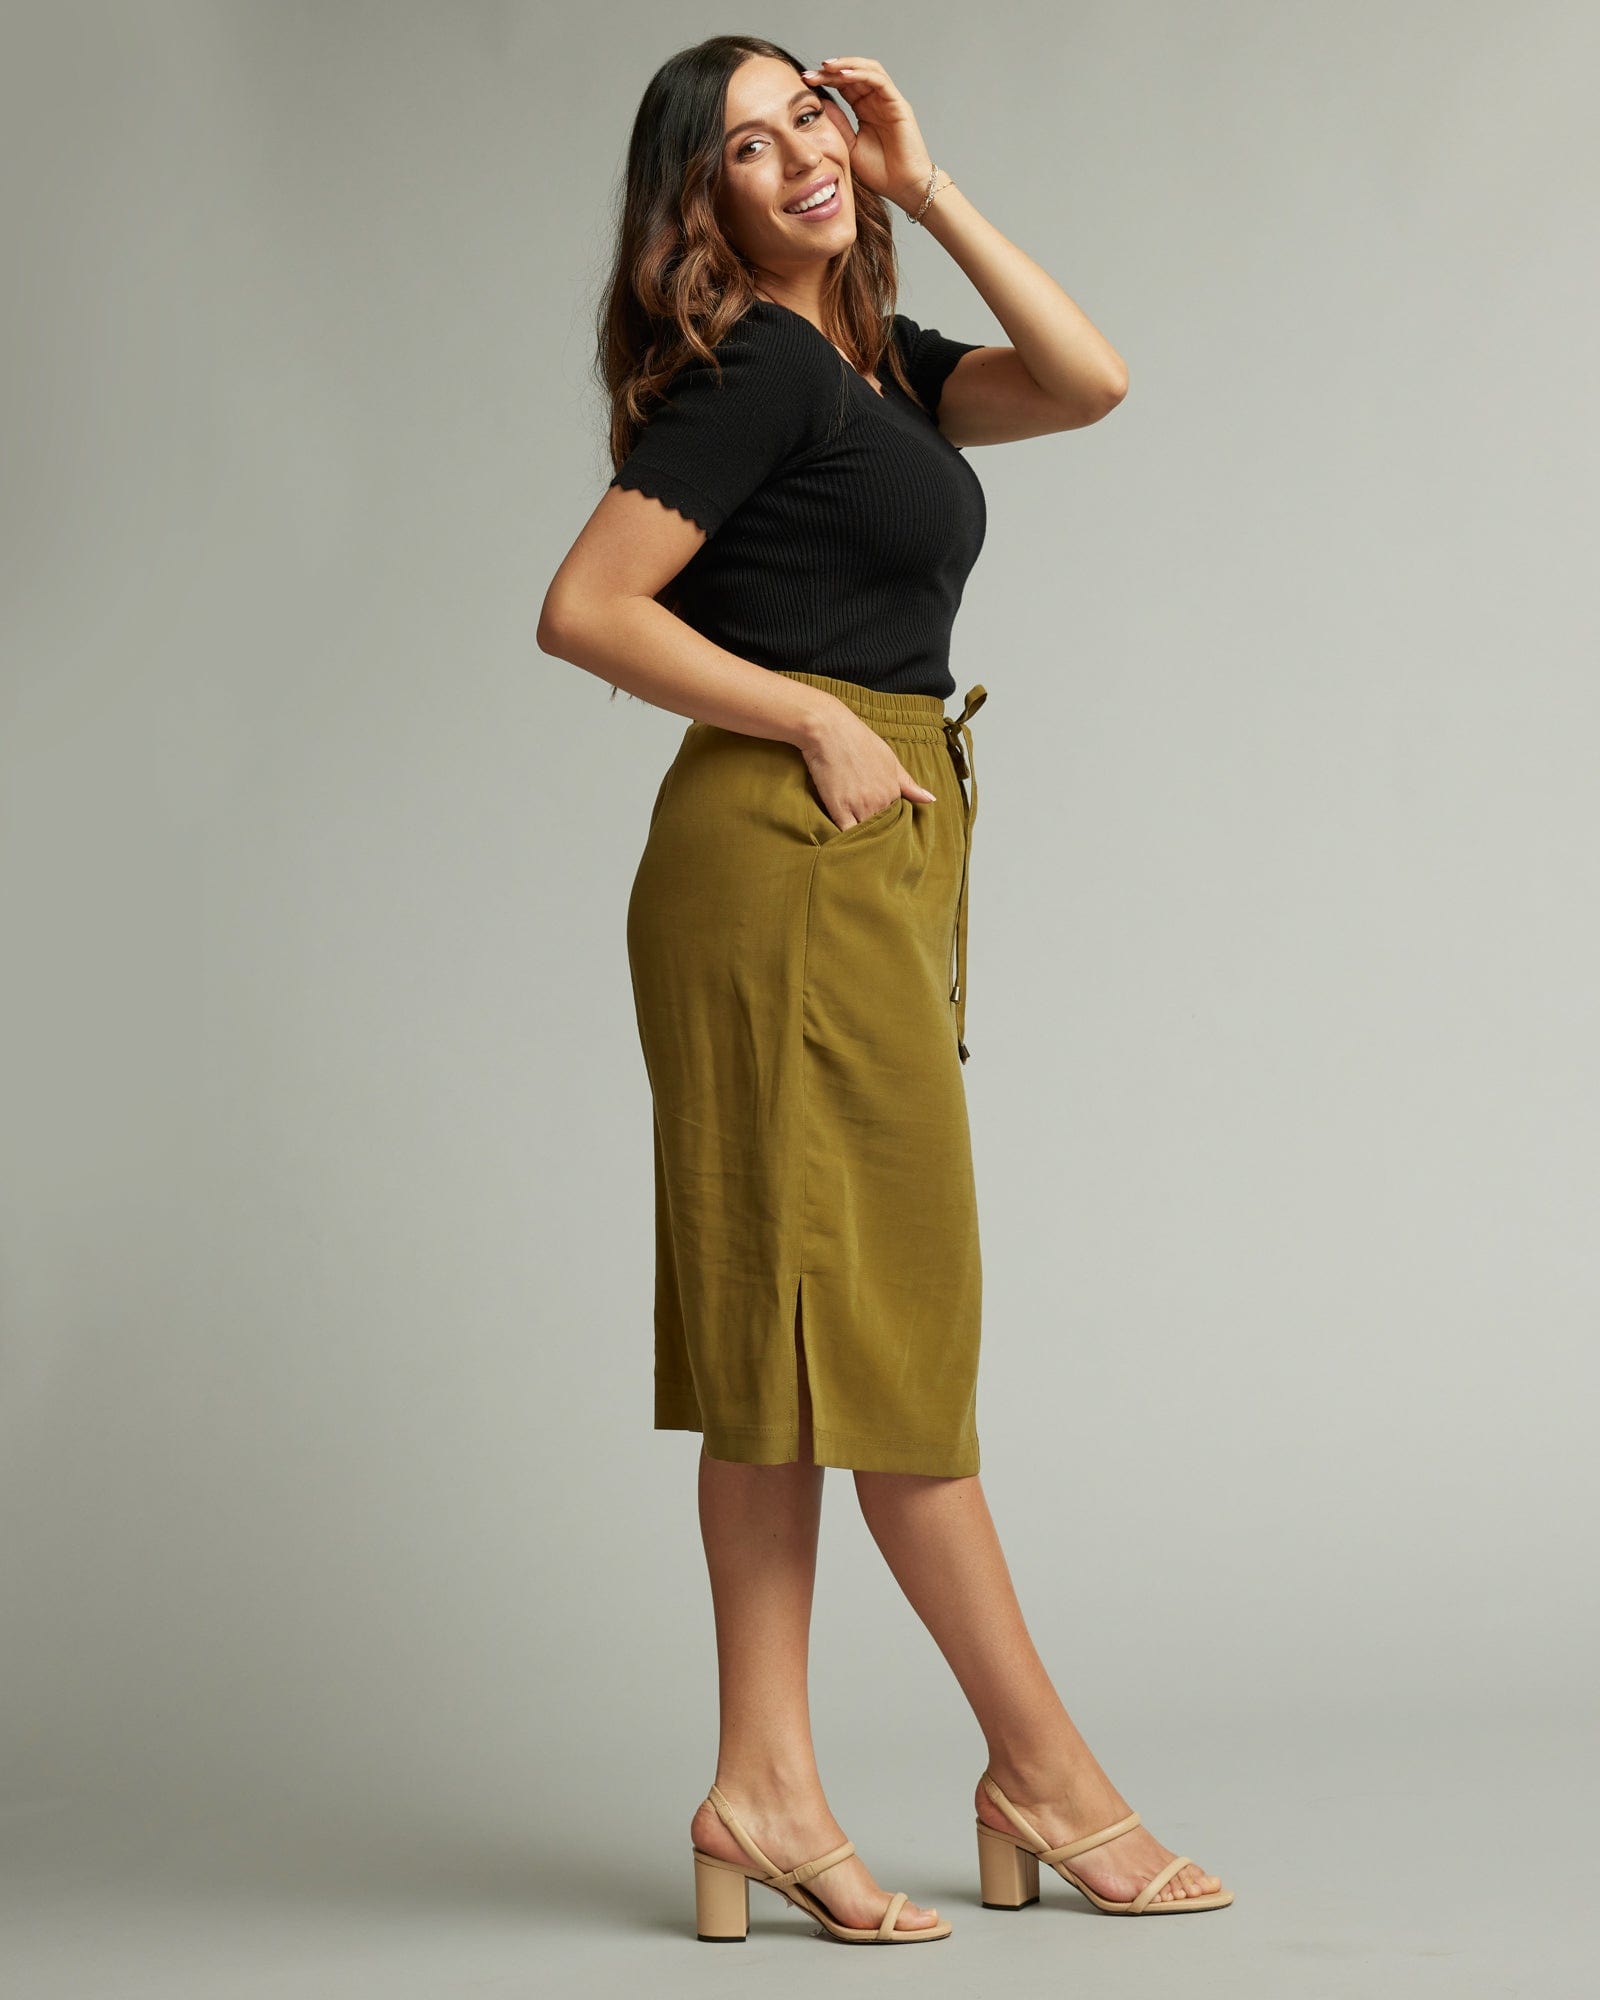 Woman in an olive knee-length skirt